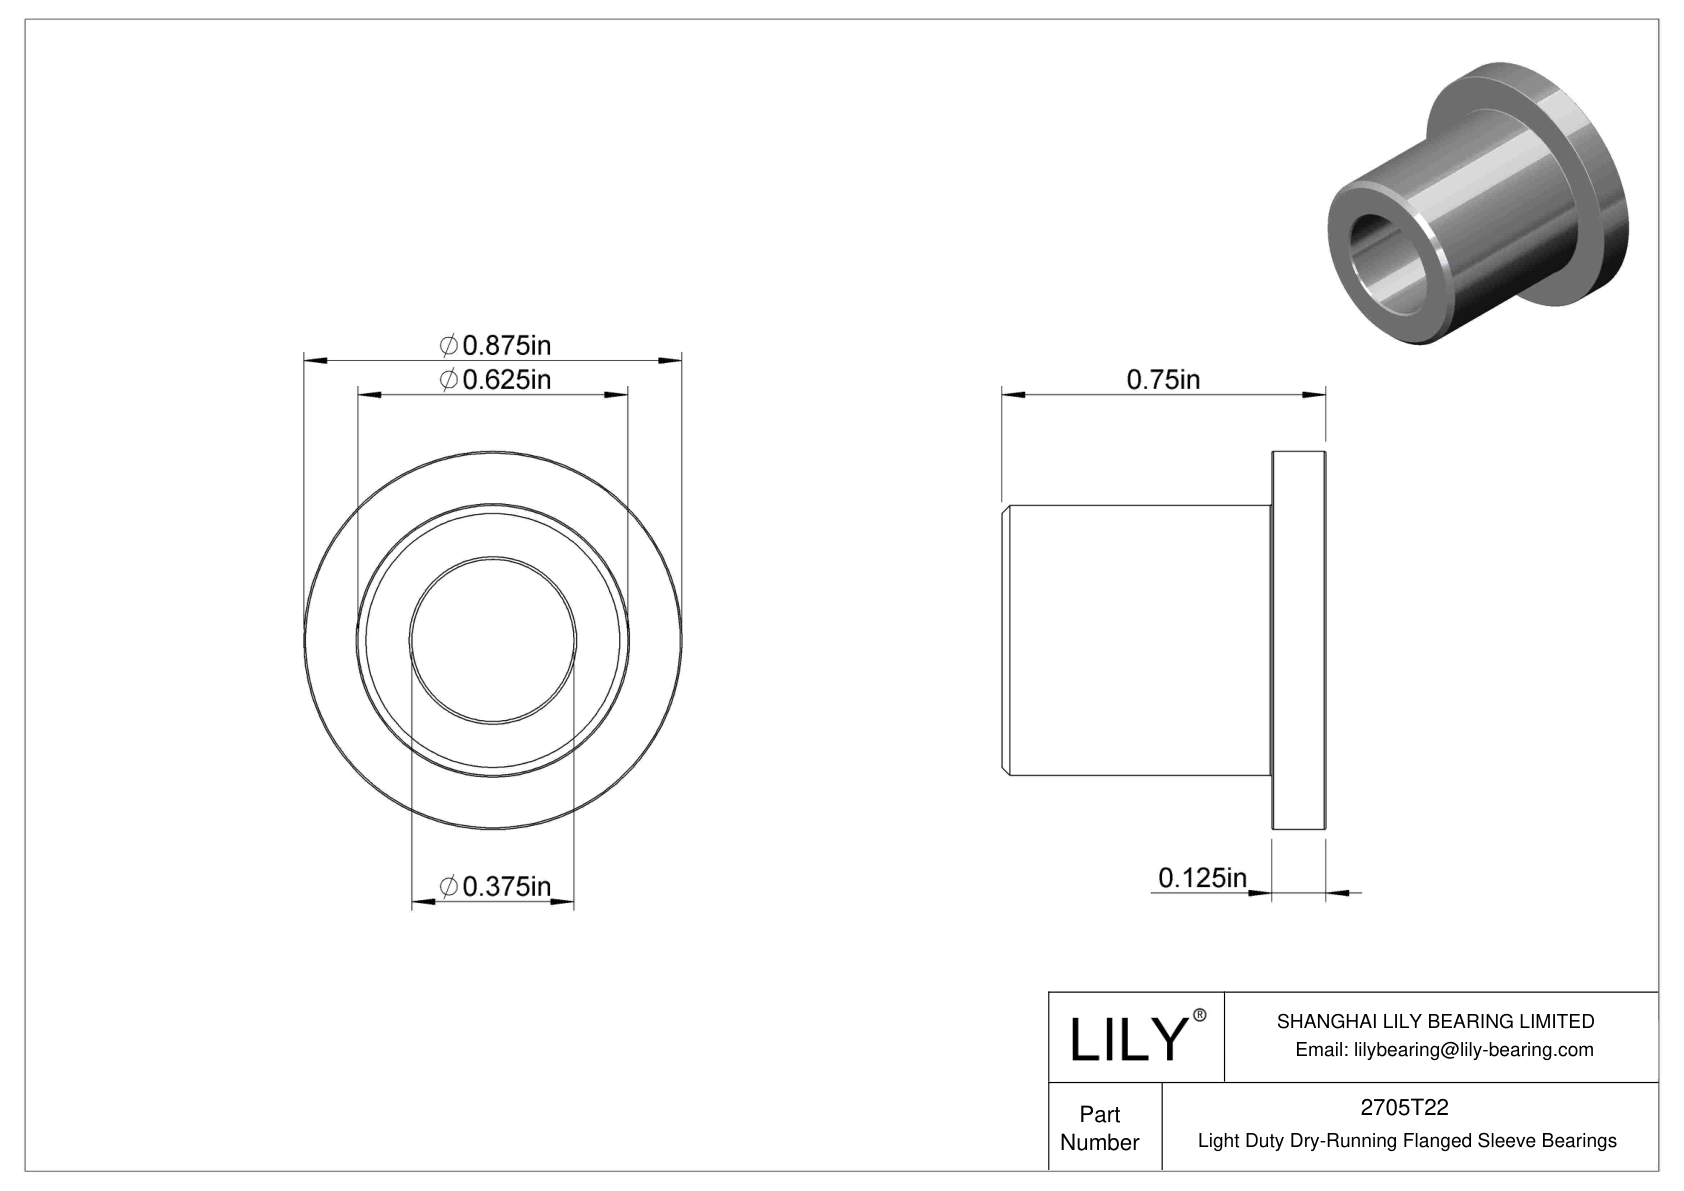 CHAFTCC Light Duty Dry-Running Flanged Sleeve Bearings cad drawing